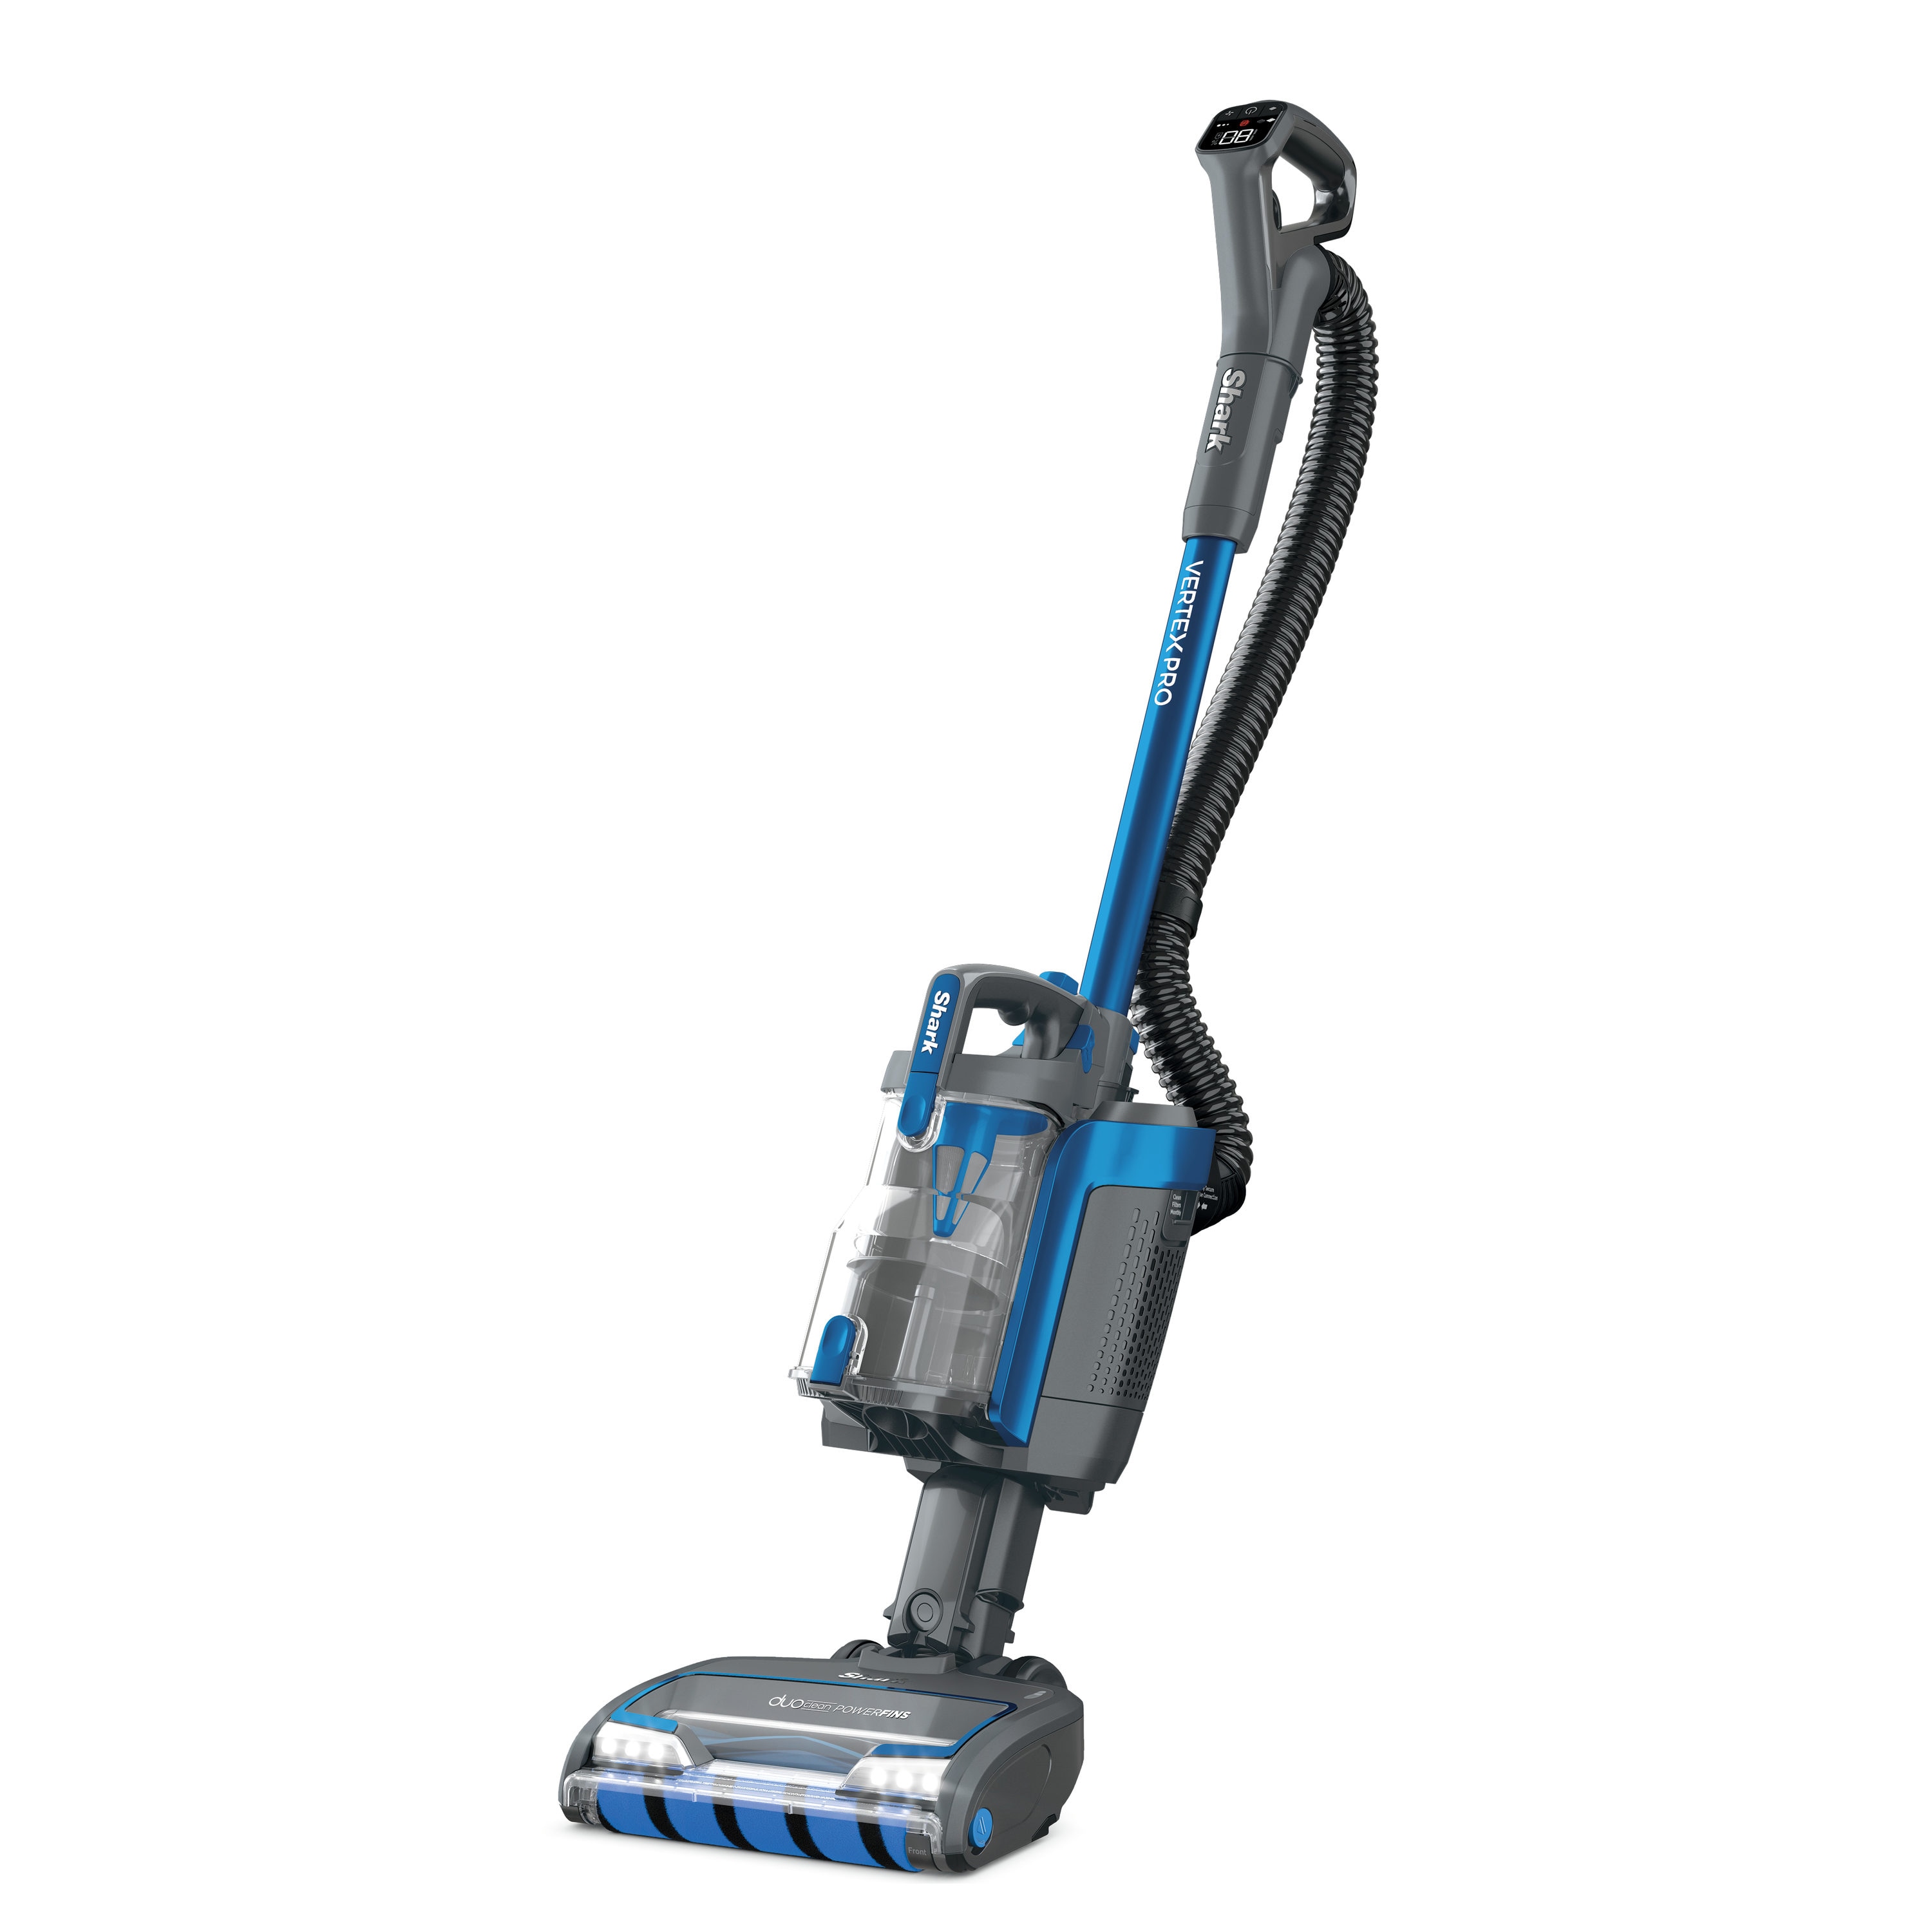 We Tested the Shark Cordless Detect Pro Vacuum — Here Are Our